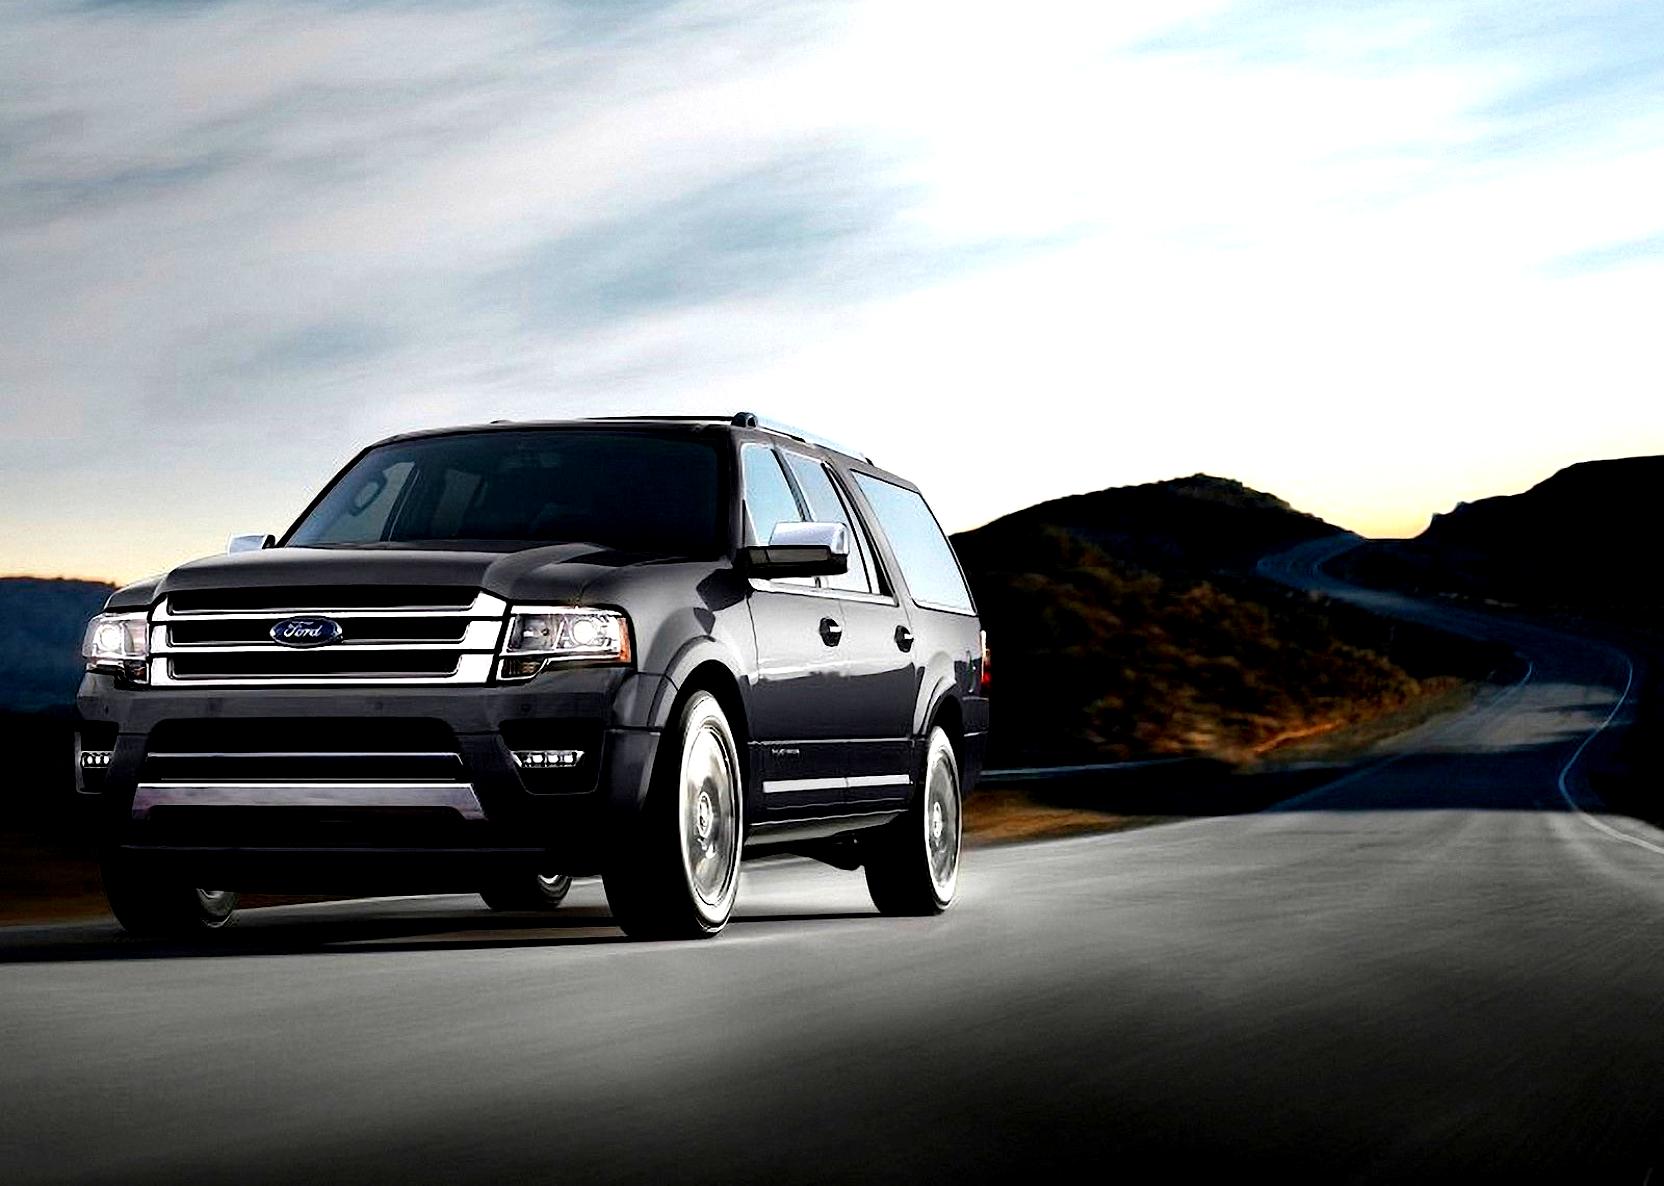 Ford Expedition 2014 #95